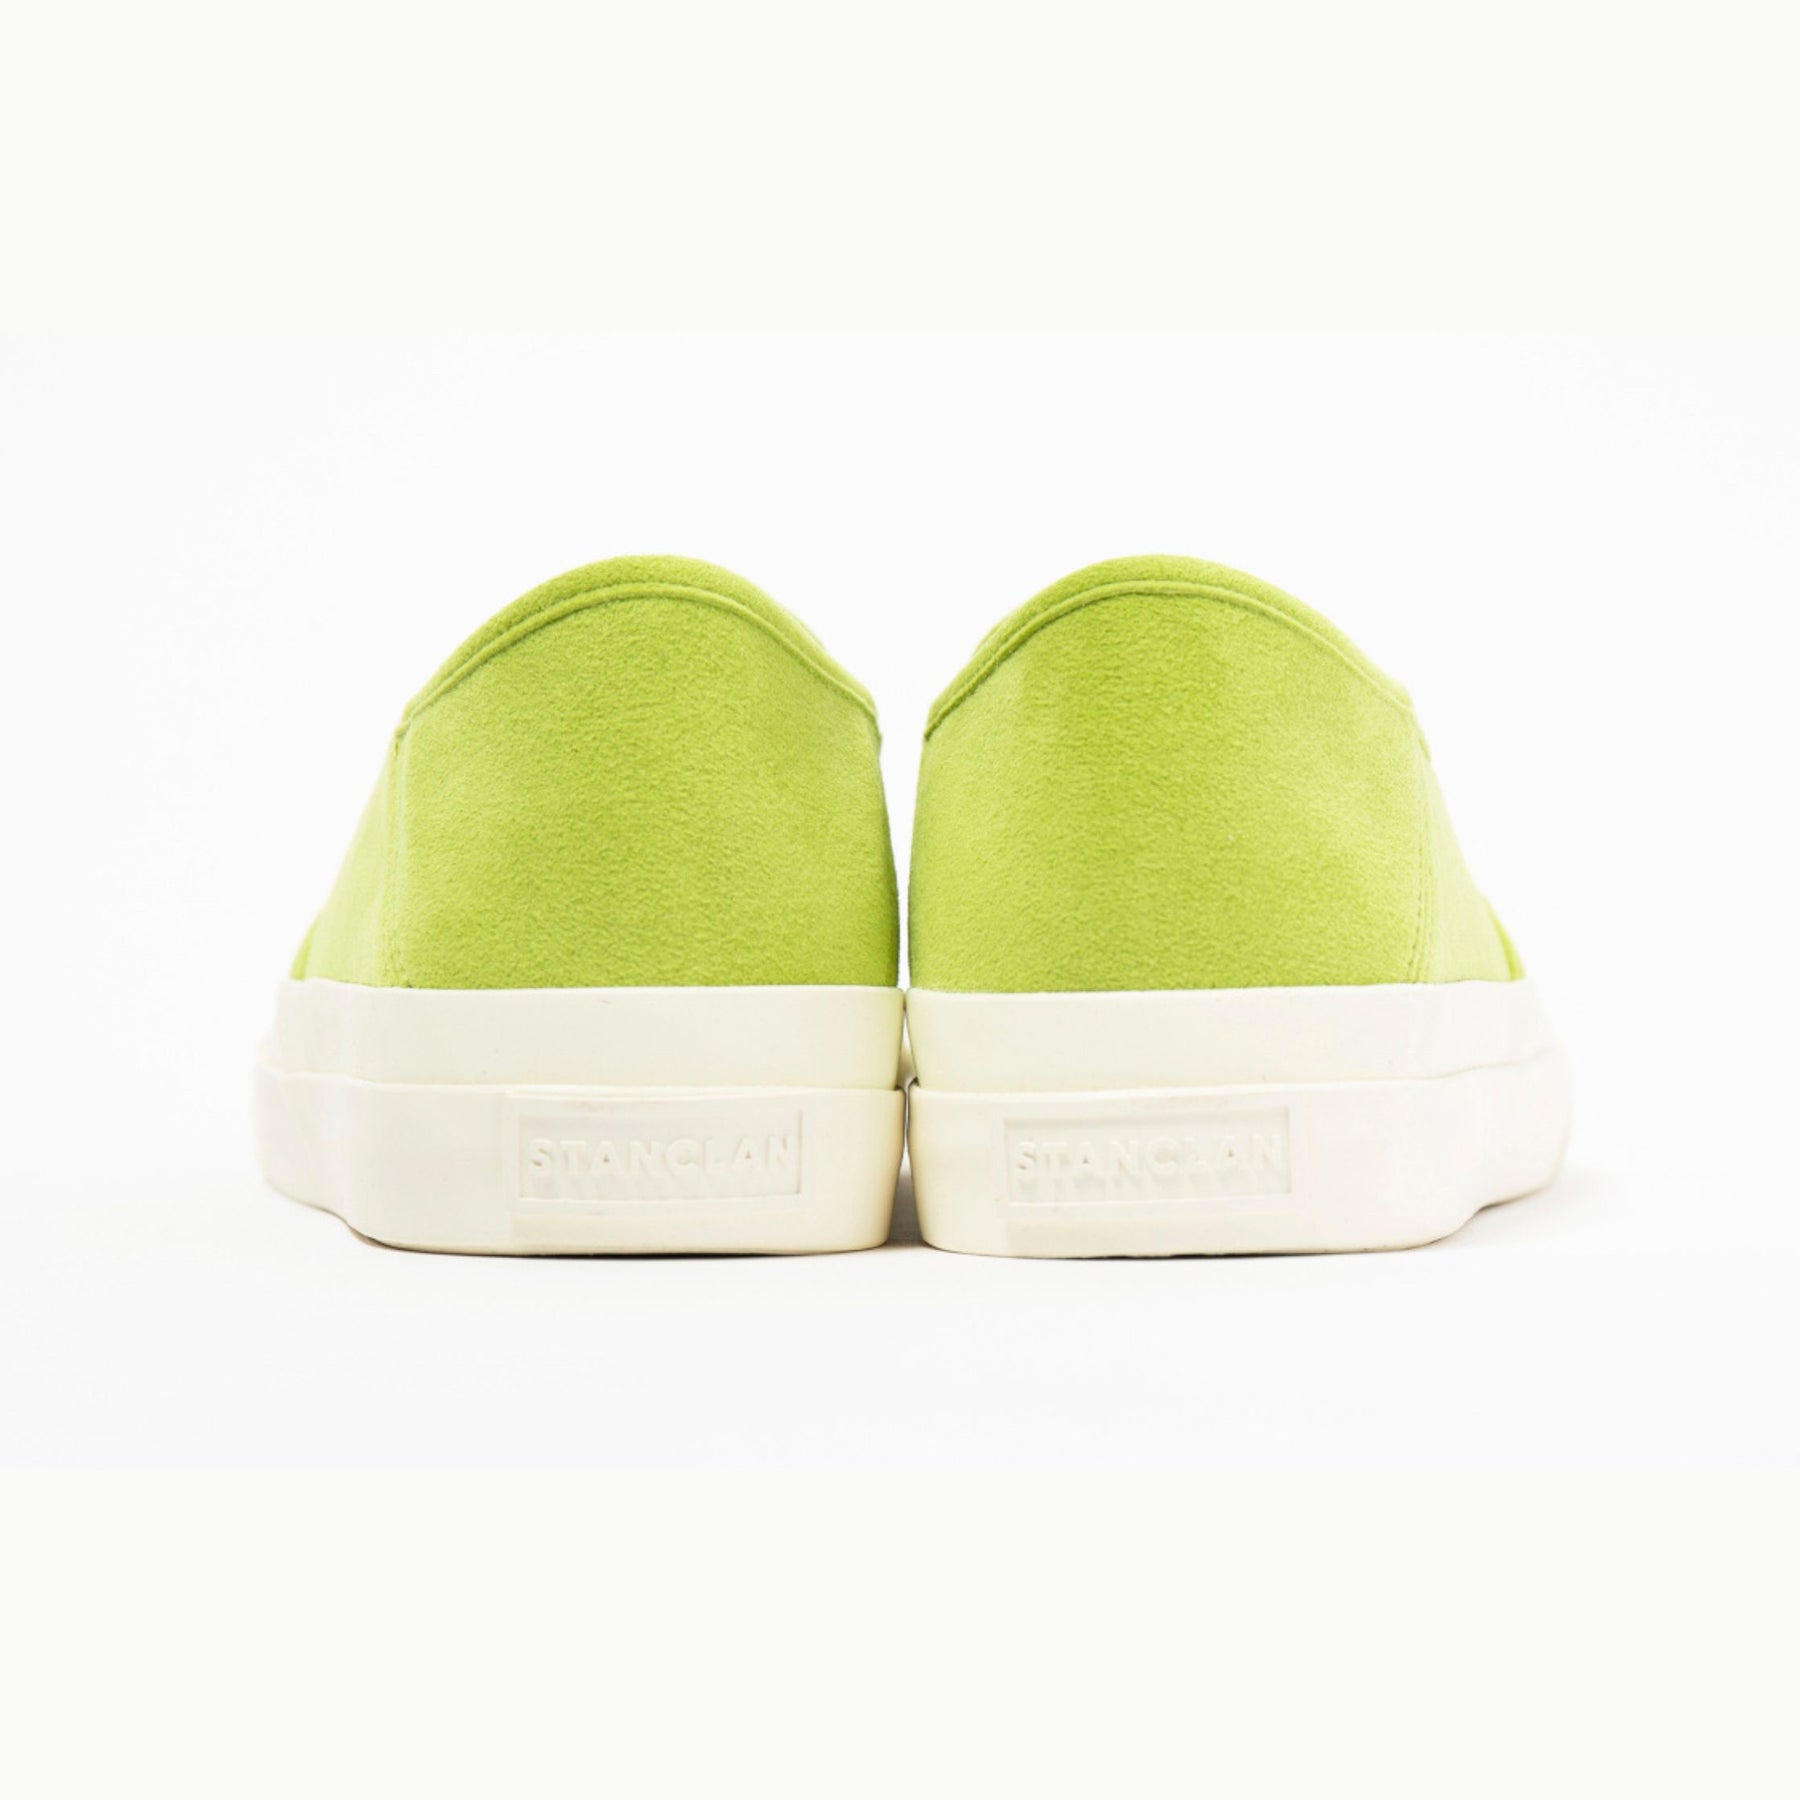 ZUPPA Suede Lime